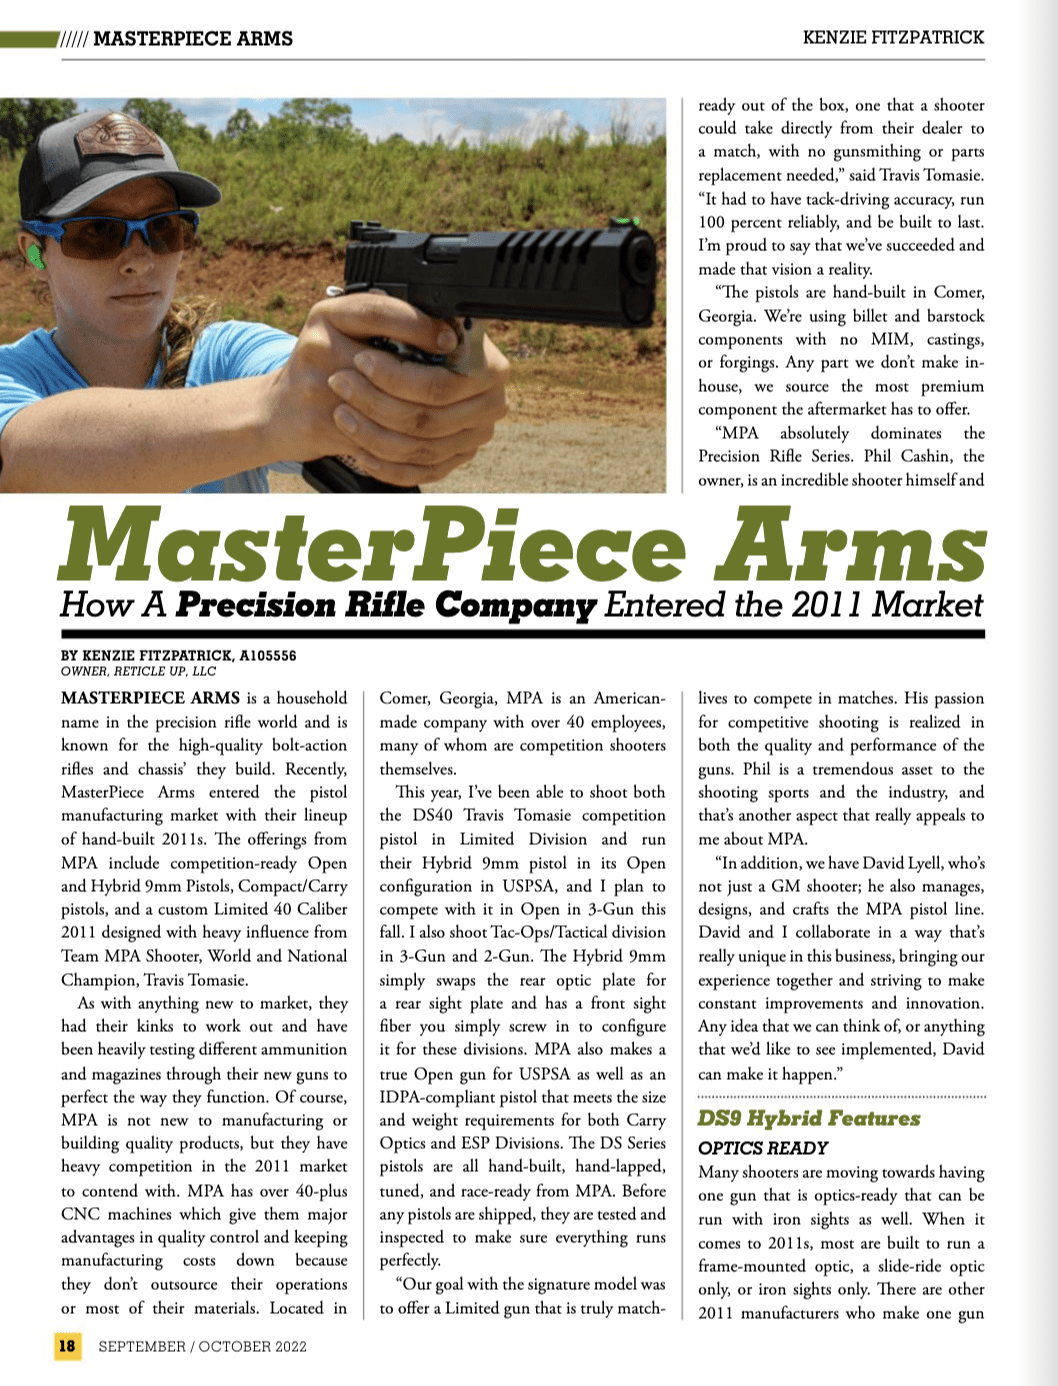 MasterPiece Arms: How a Precision Rifle Company Entered the 2011 Market